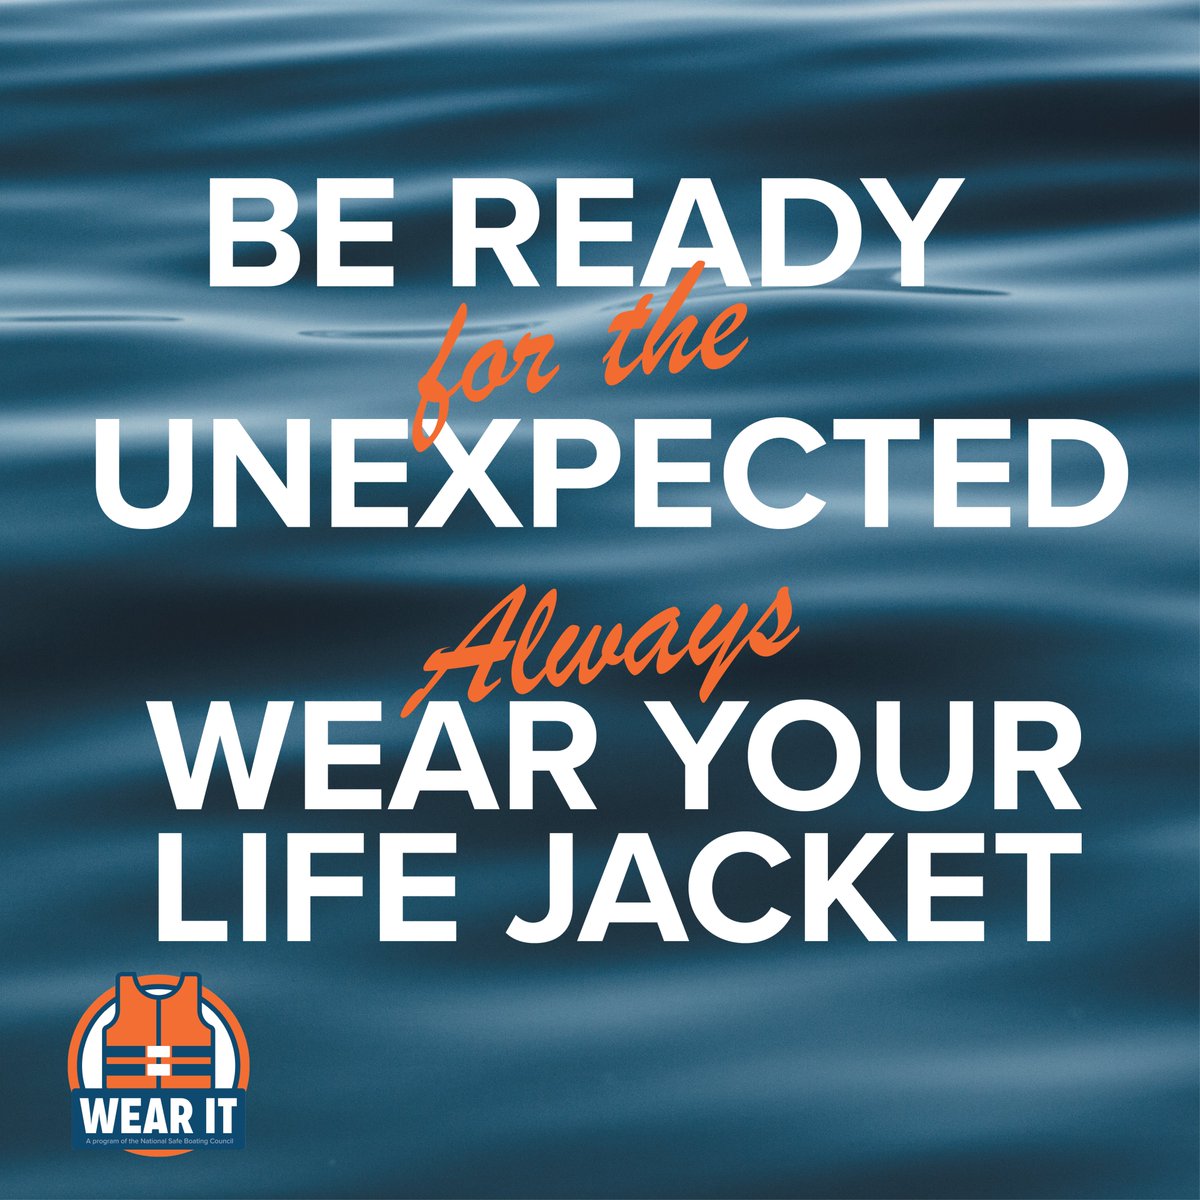 The best life jacket is one you will wear. Accidents happen quickly -- if you’re not wearing your life jacket, you won’t have time to put it on. Life jackets are for everyone, regardless of your age or swimming ability. Always #WearIt on our lakes! #SafeBoating #SafeBoatingWeek